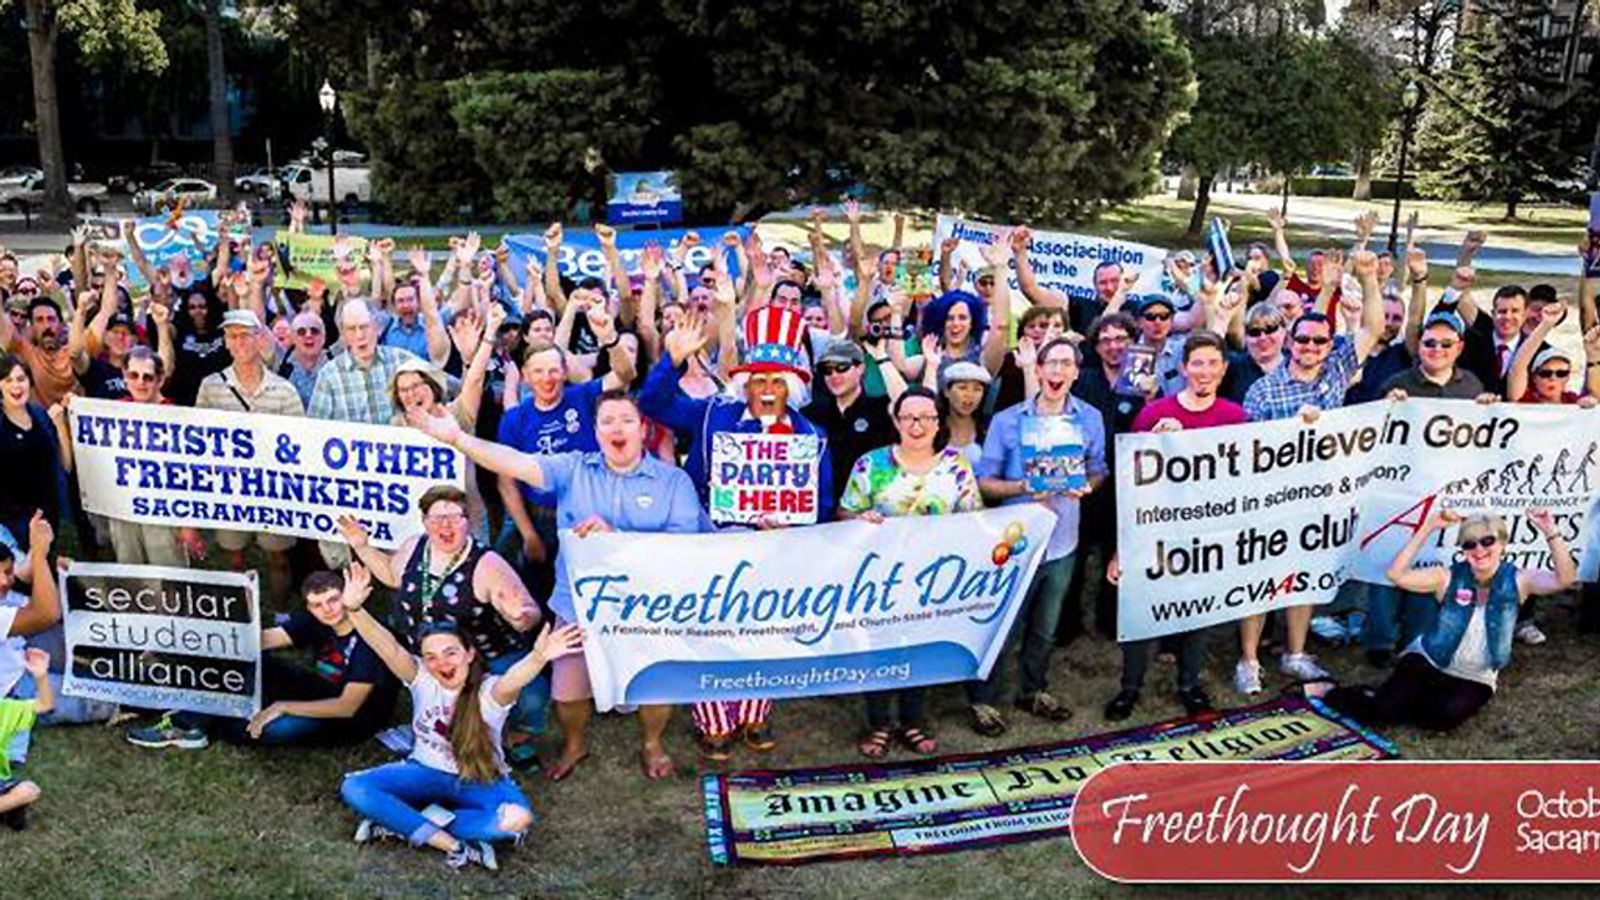 OpEd: Let's Hear It For Freethought Day In California!